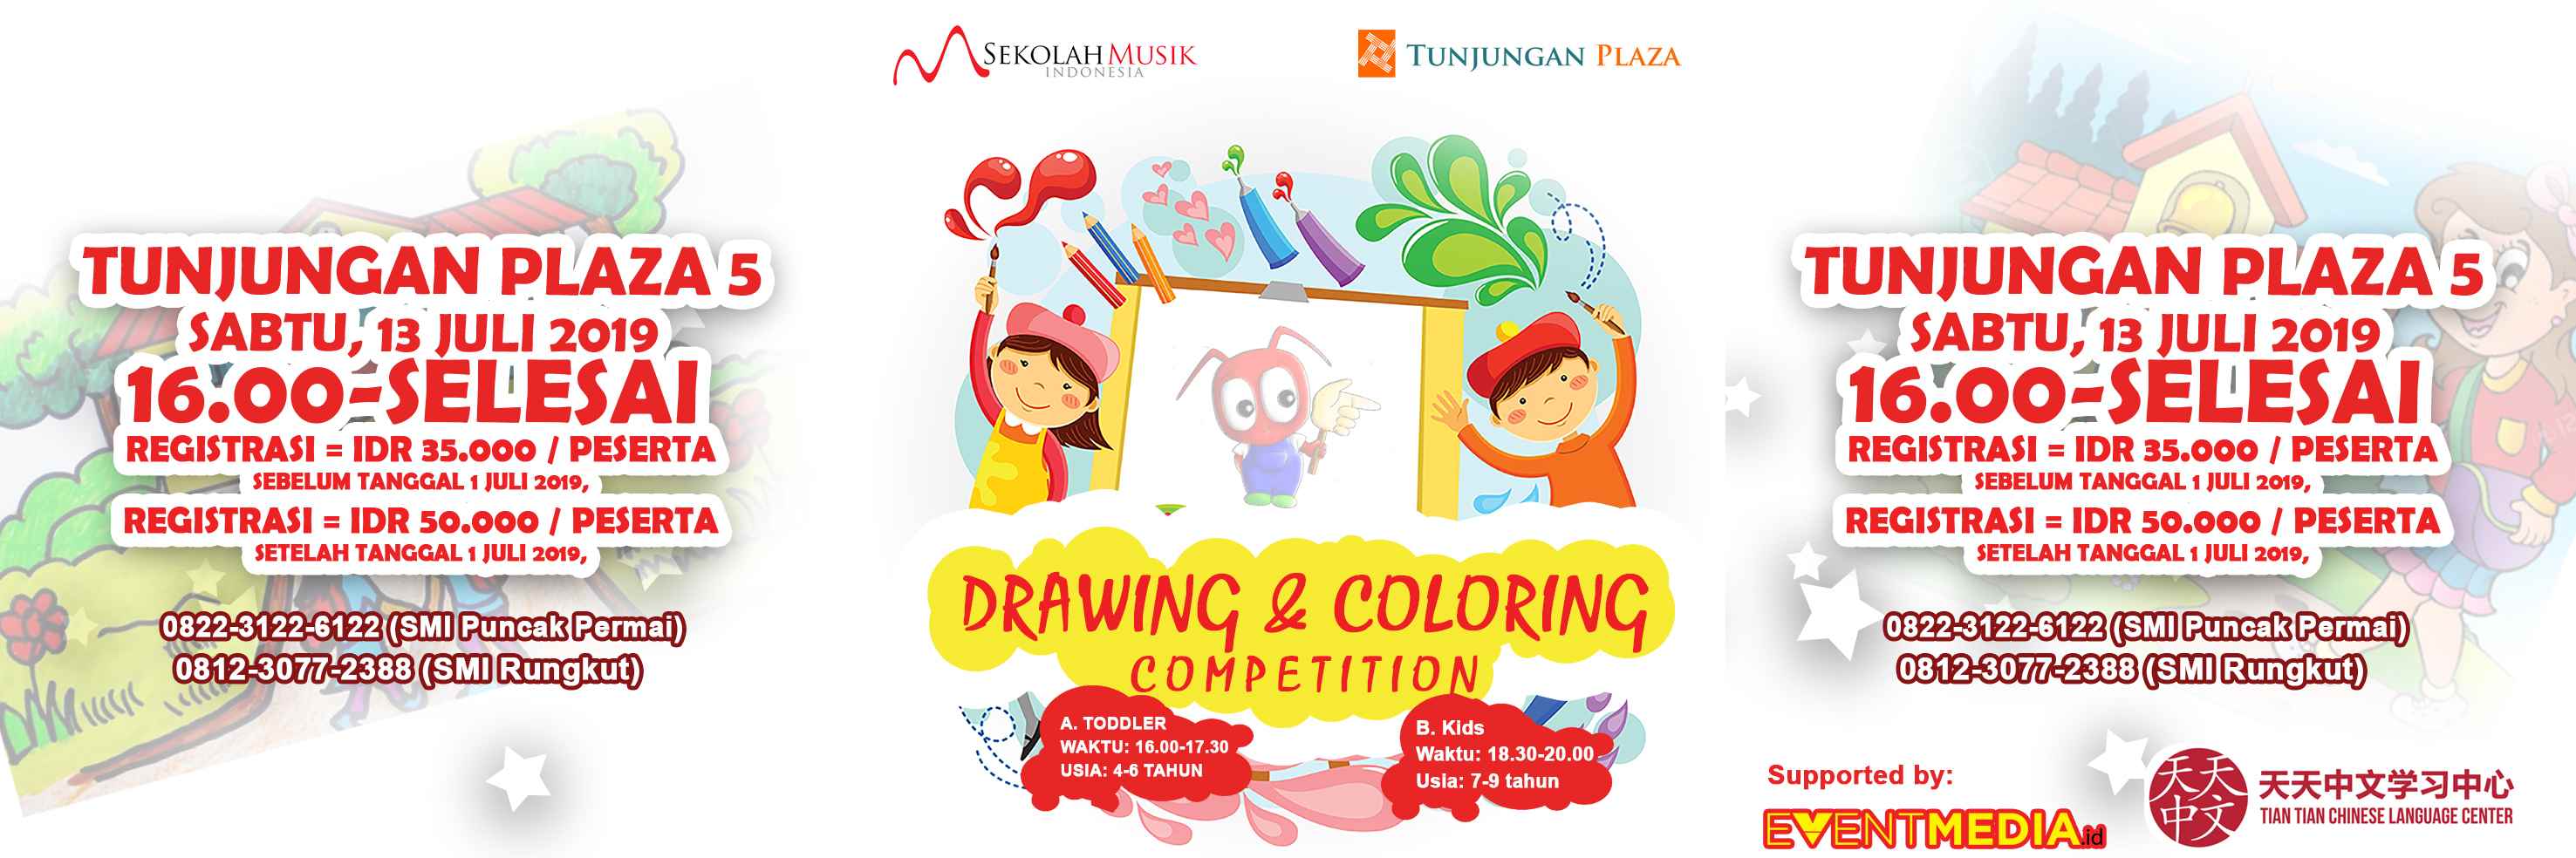 lomba SMI Drawing & Coloring Competition image 1